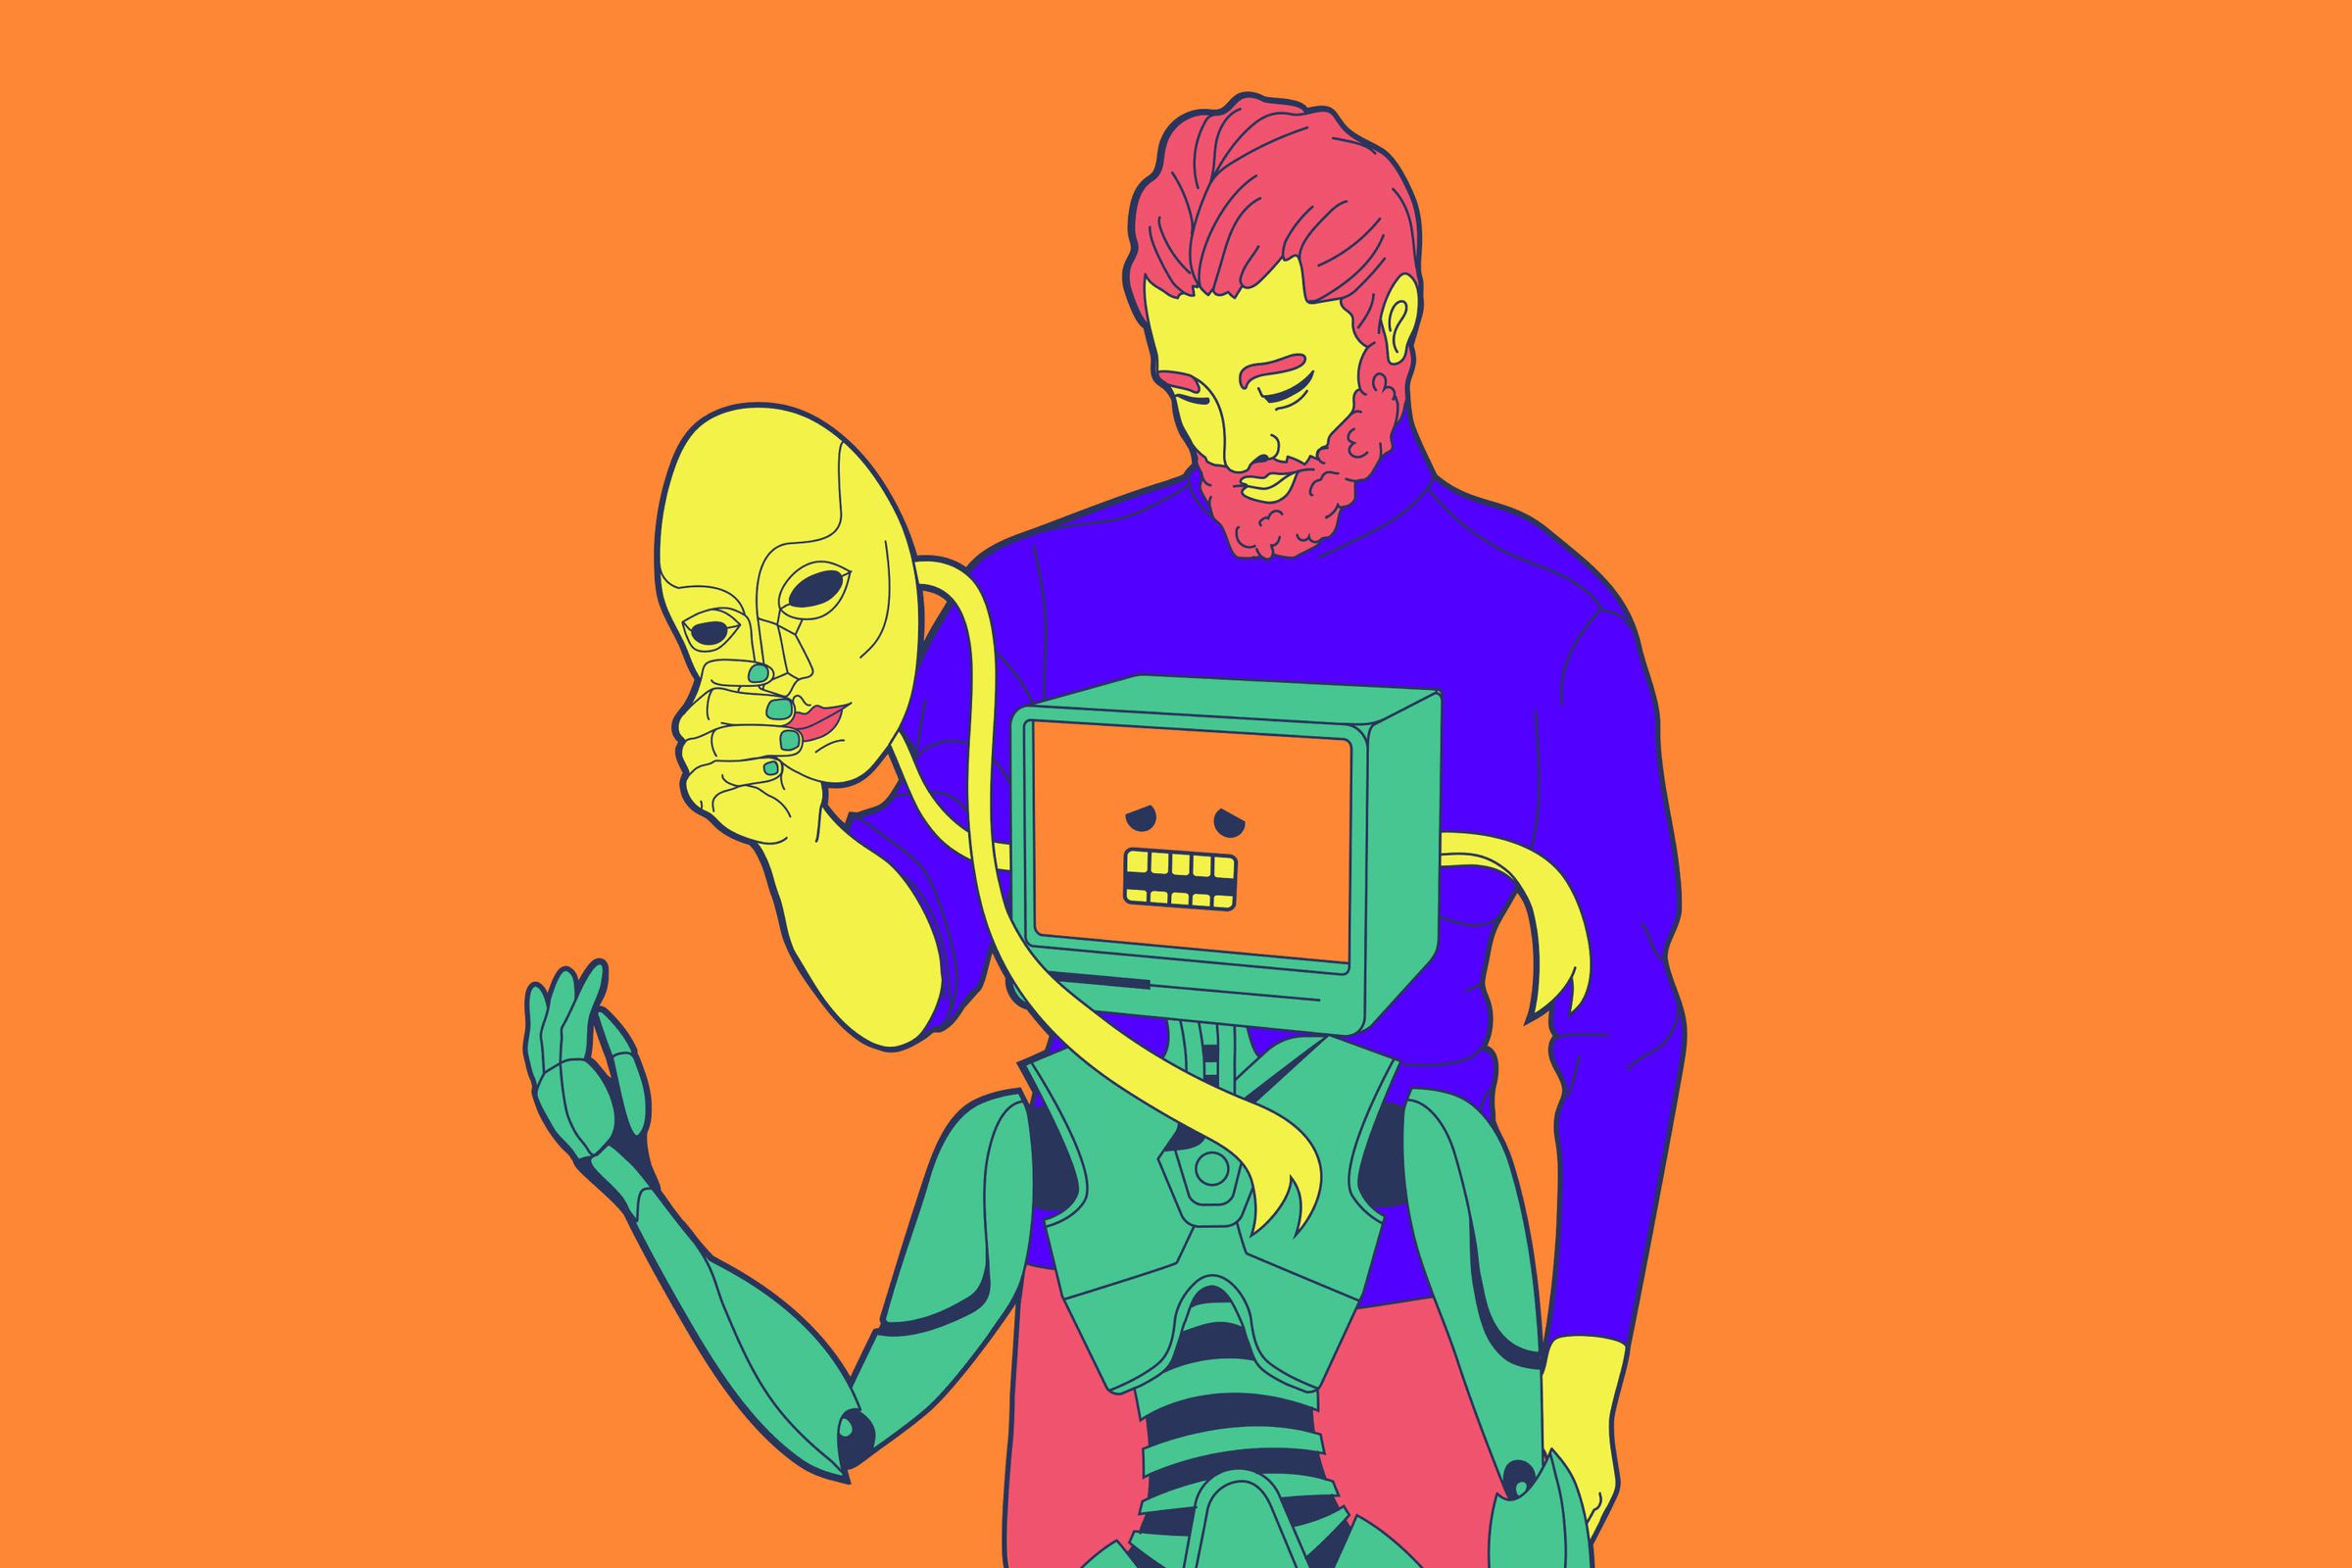 An illustration of a man pulling a theater mask off a humanoid body to reveal a computer screen.